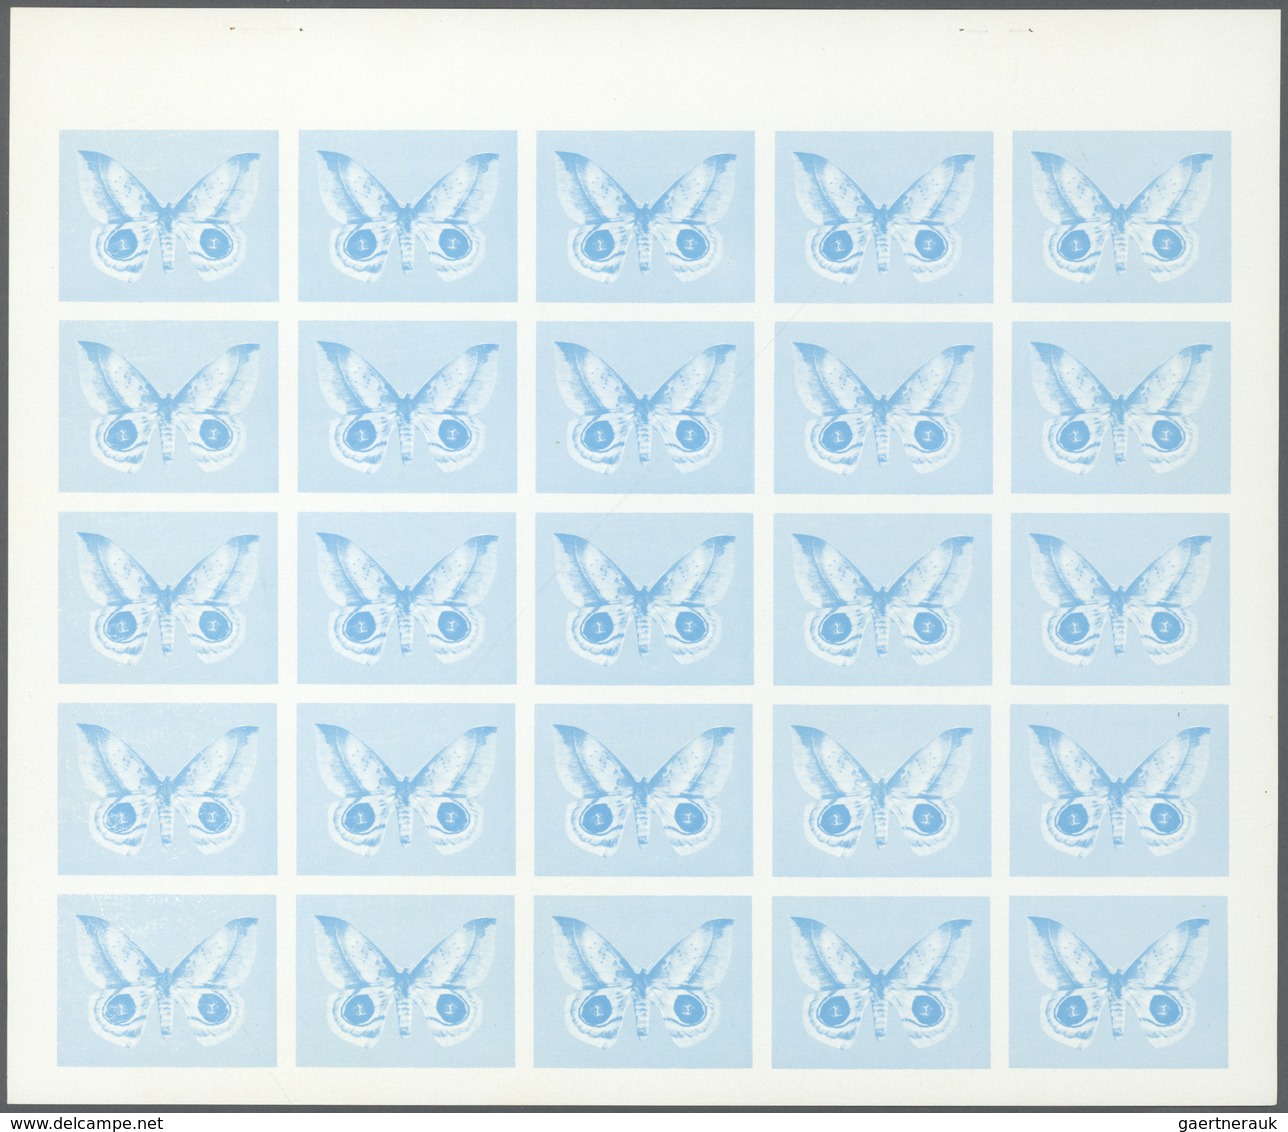 Schardscha / Sharjah: 1972. Sharjah. Progressive proof (7 phases) in complete sheets of 25 for the 7